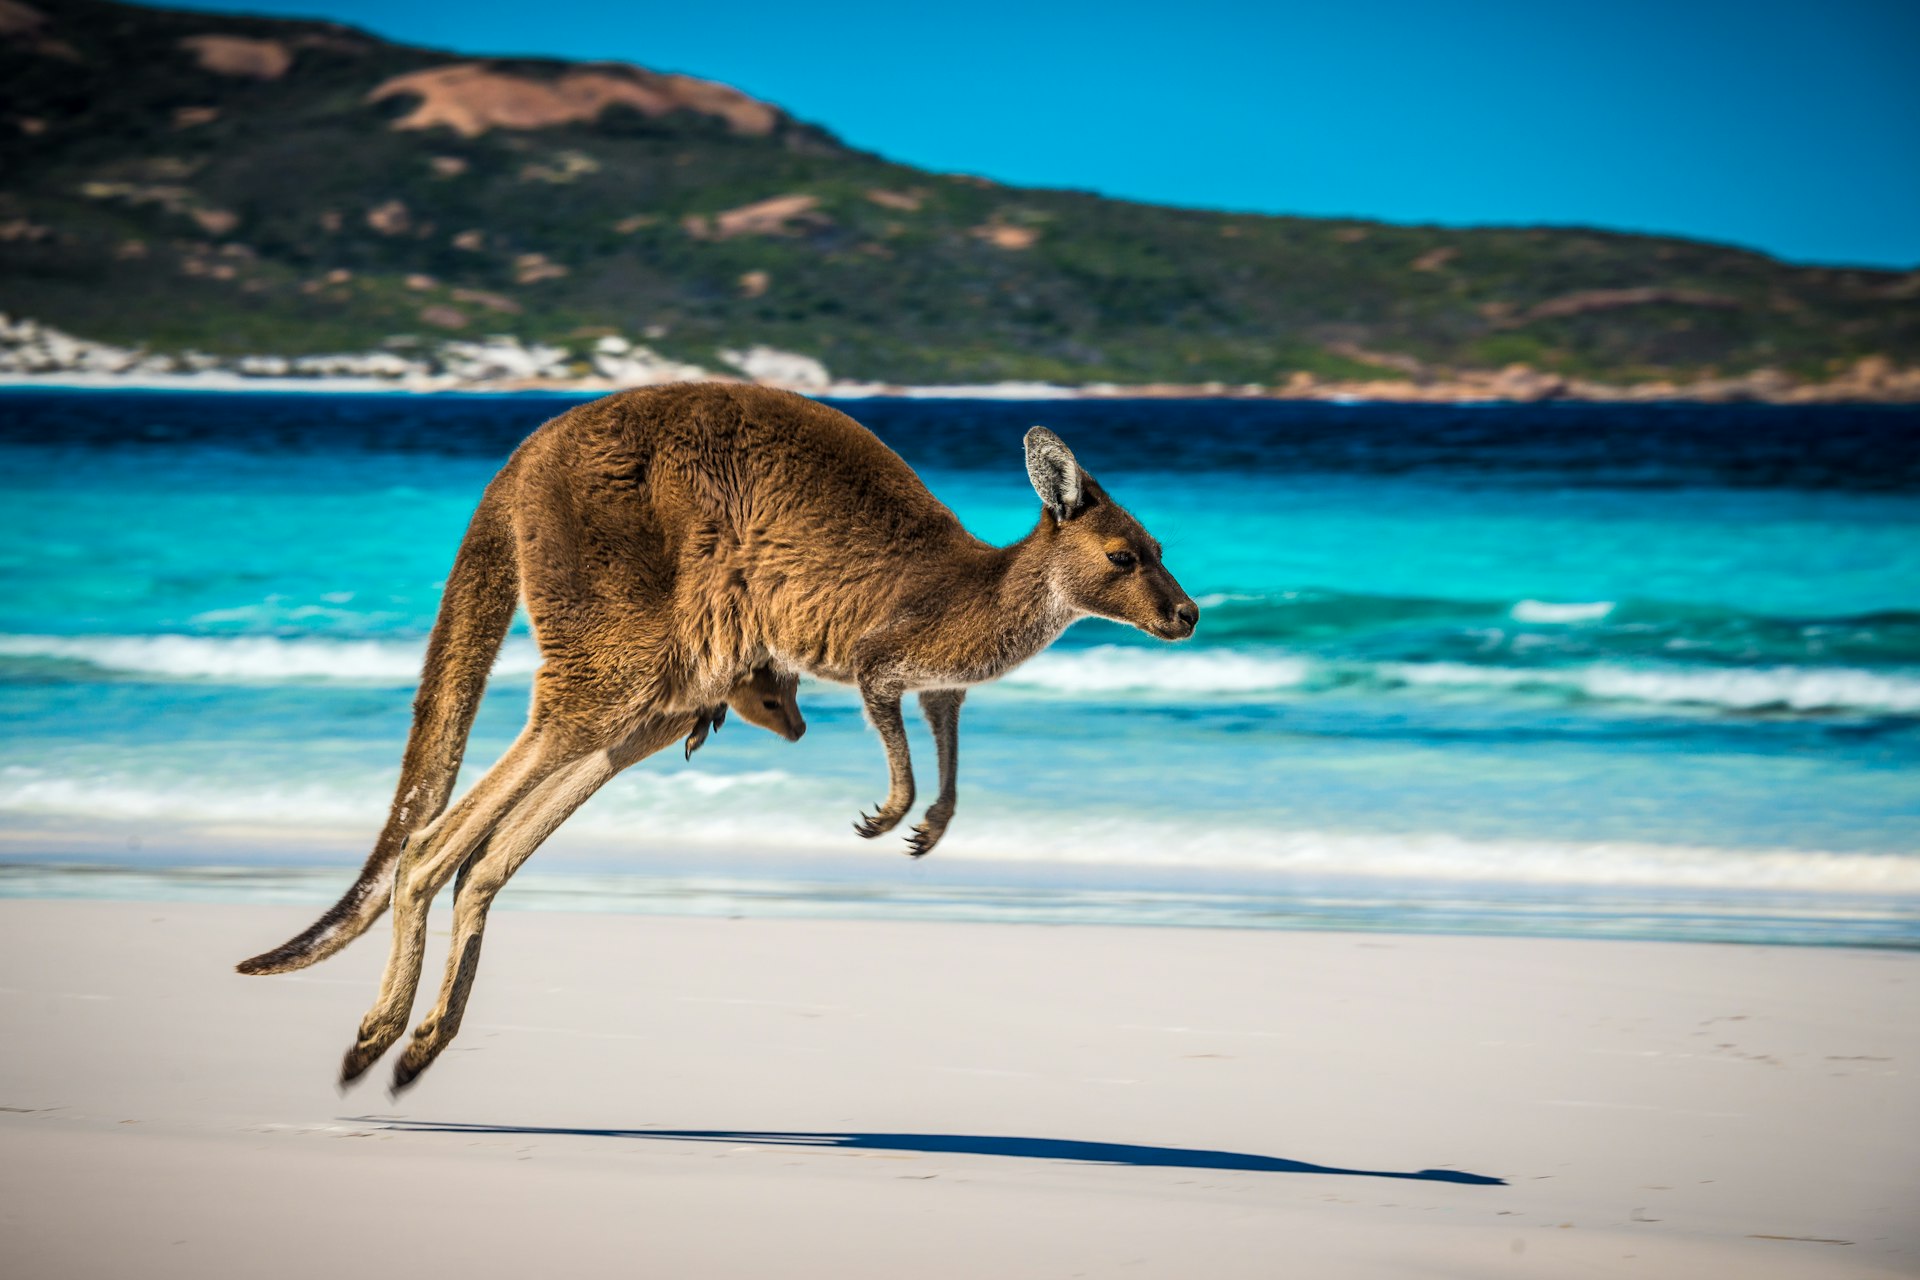 A kangaroo with a baby in its pouch leaps across the sand at the beach